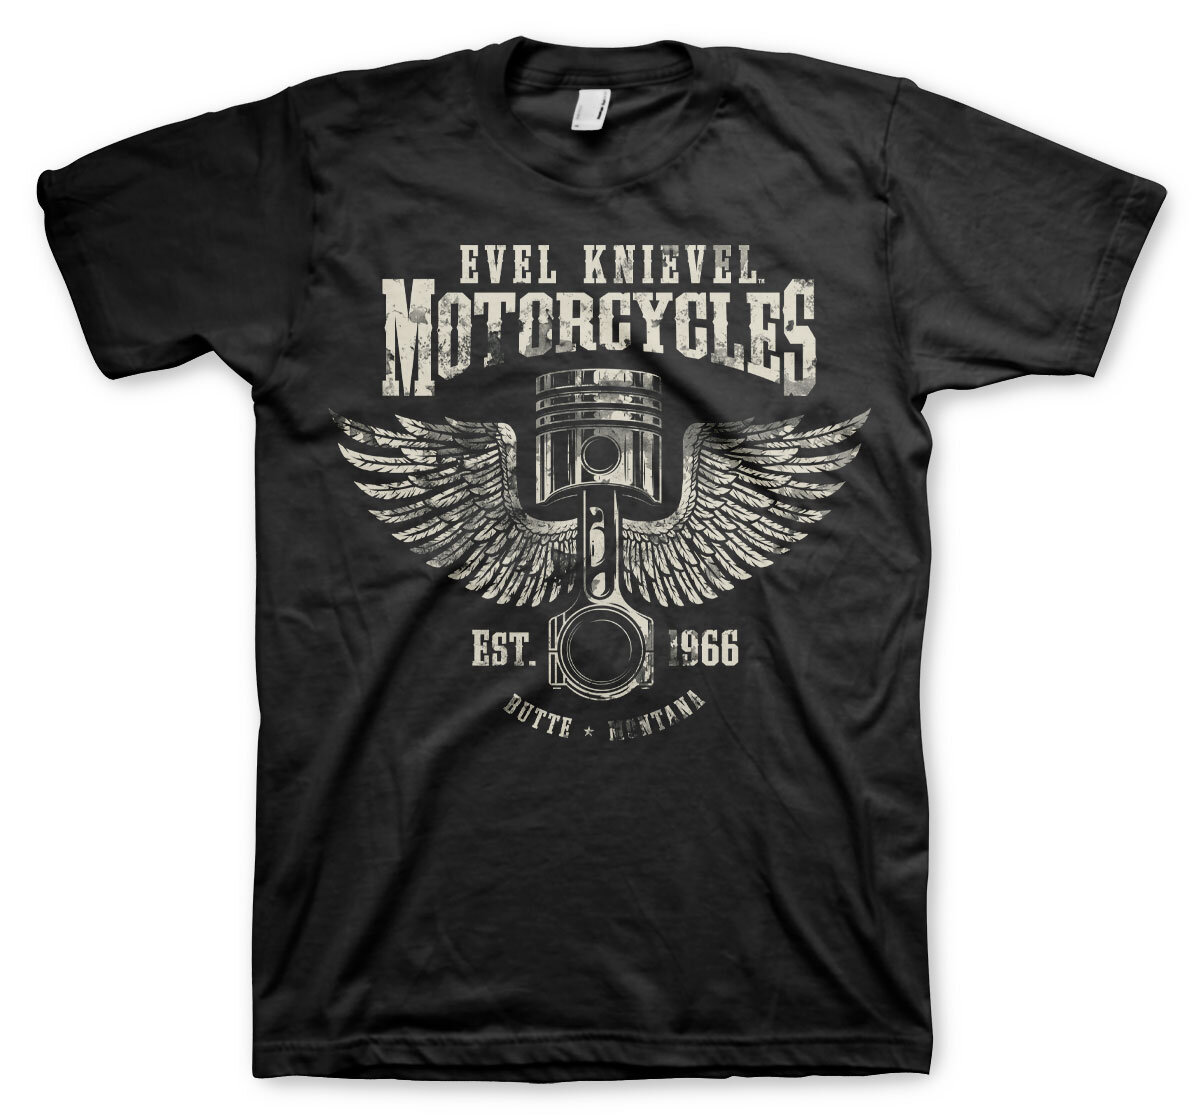 Evel Knievel Motorcycles T-Shirt